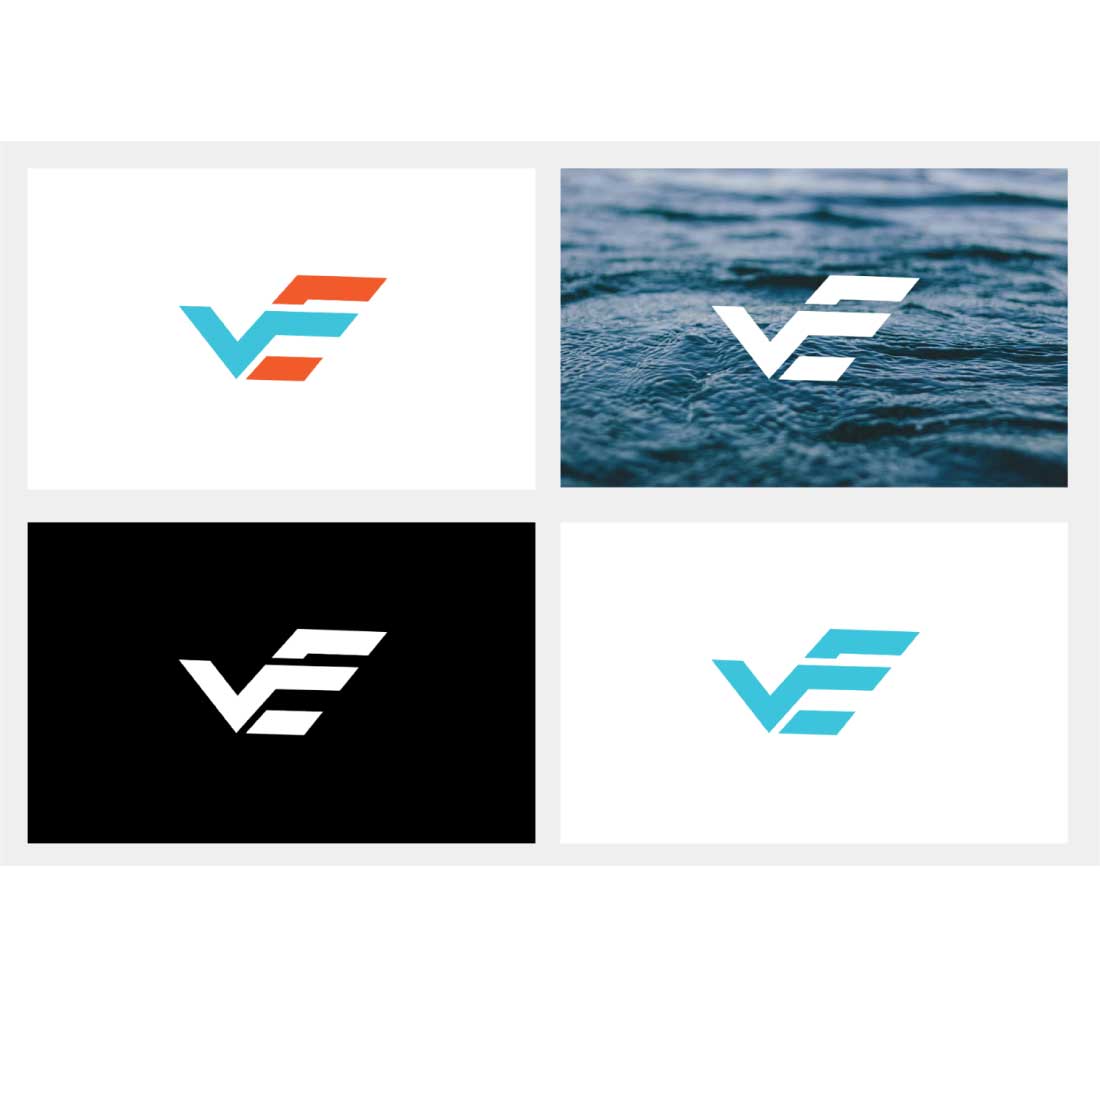 CREATIVE VE Letter Brand Identity Logo Template cover image.